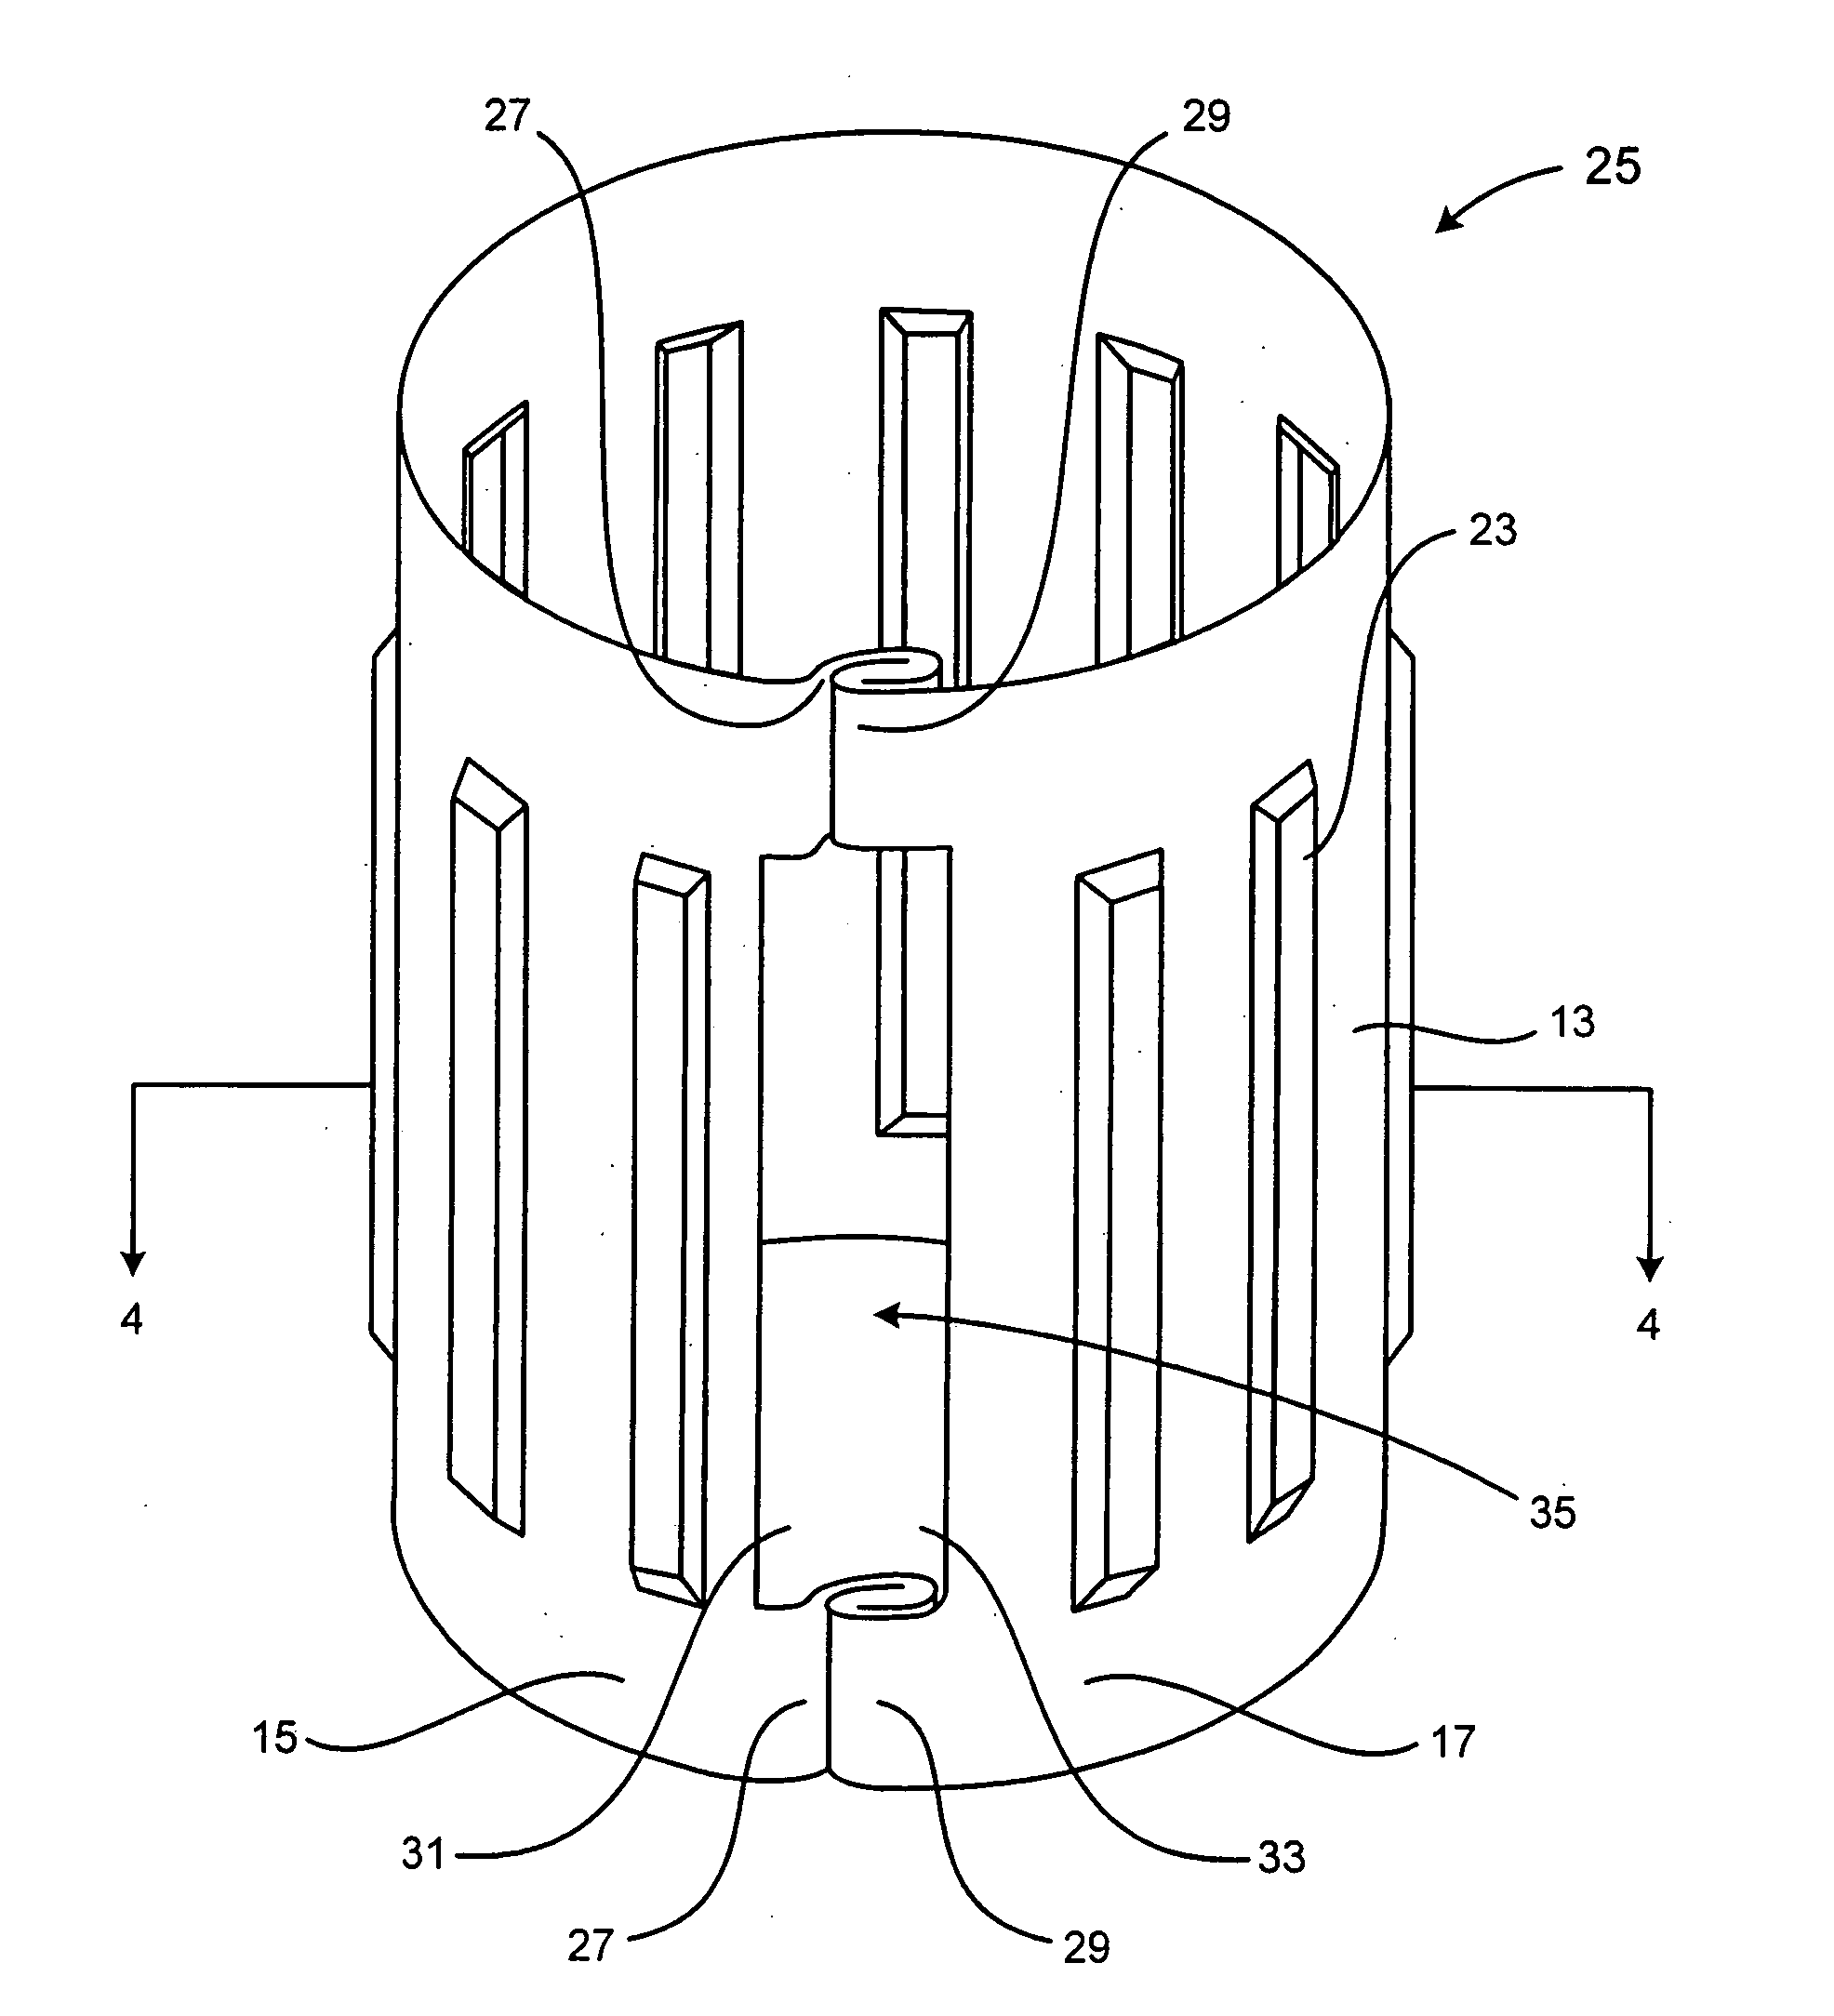 Tolerance ring for data storage with cut-out feature for mass control